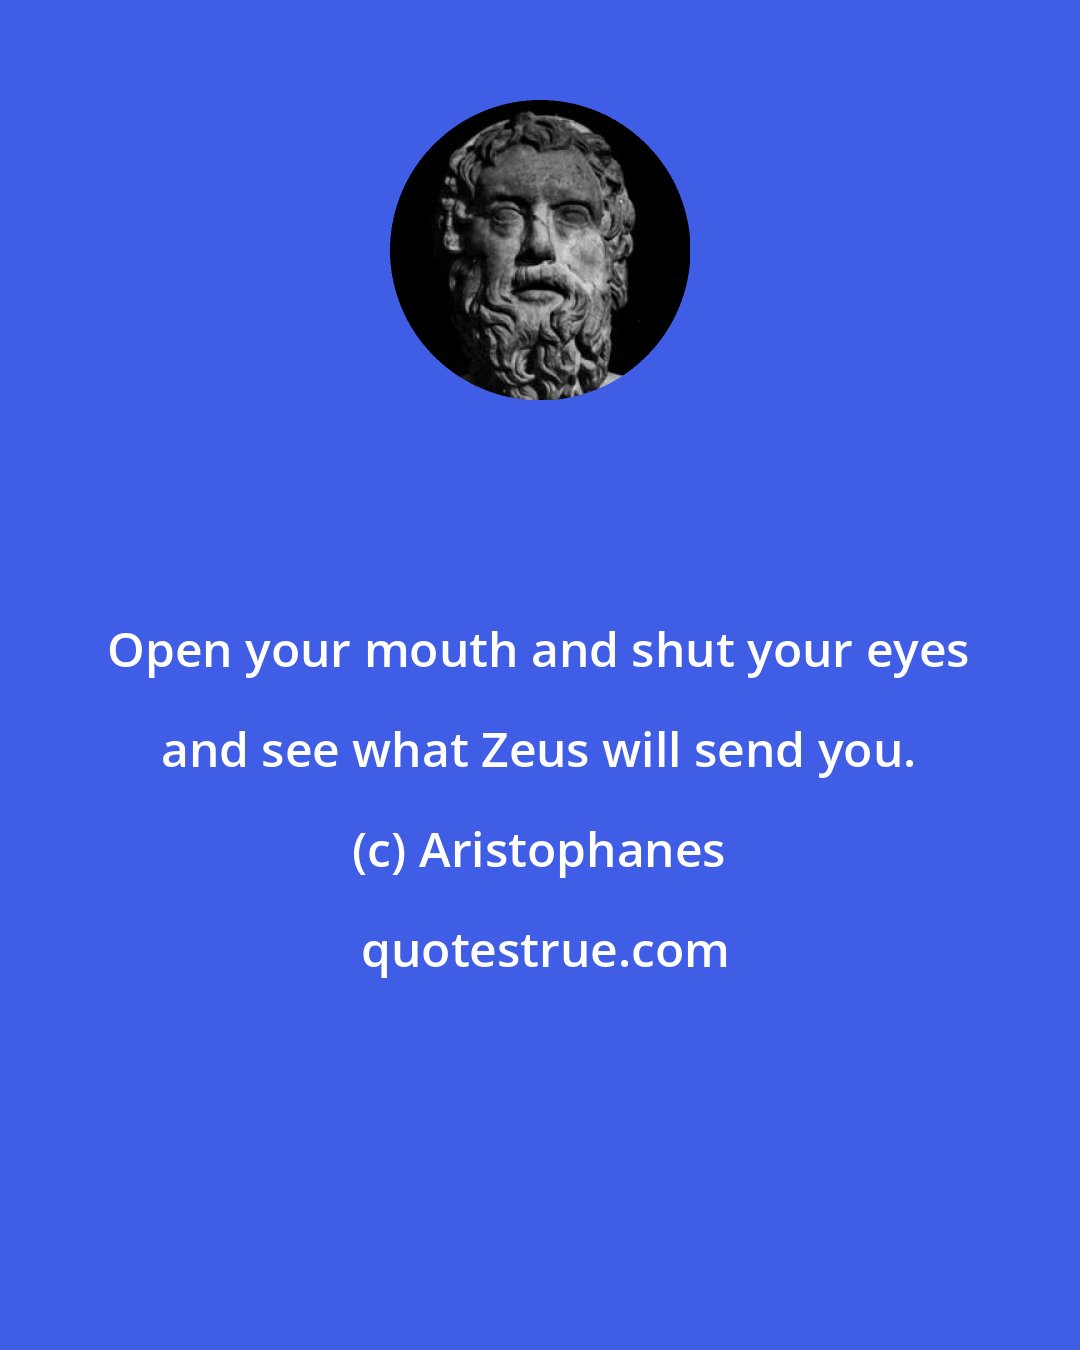 Aristophanes: Open your mouth and shut your eyes and see what Zeus will send you.